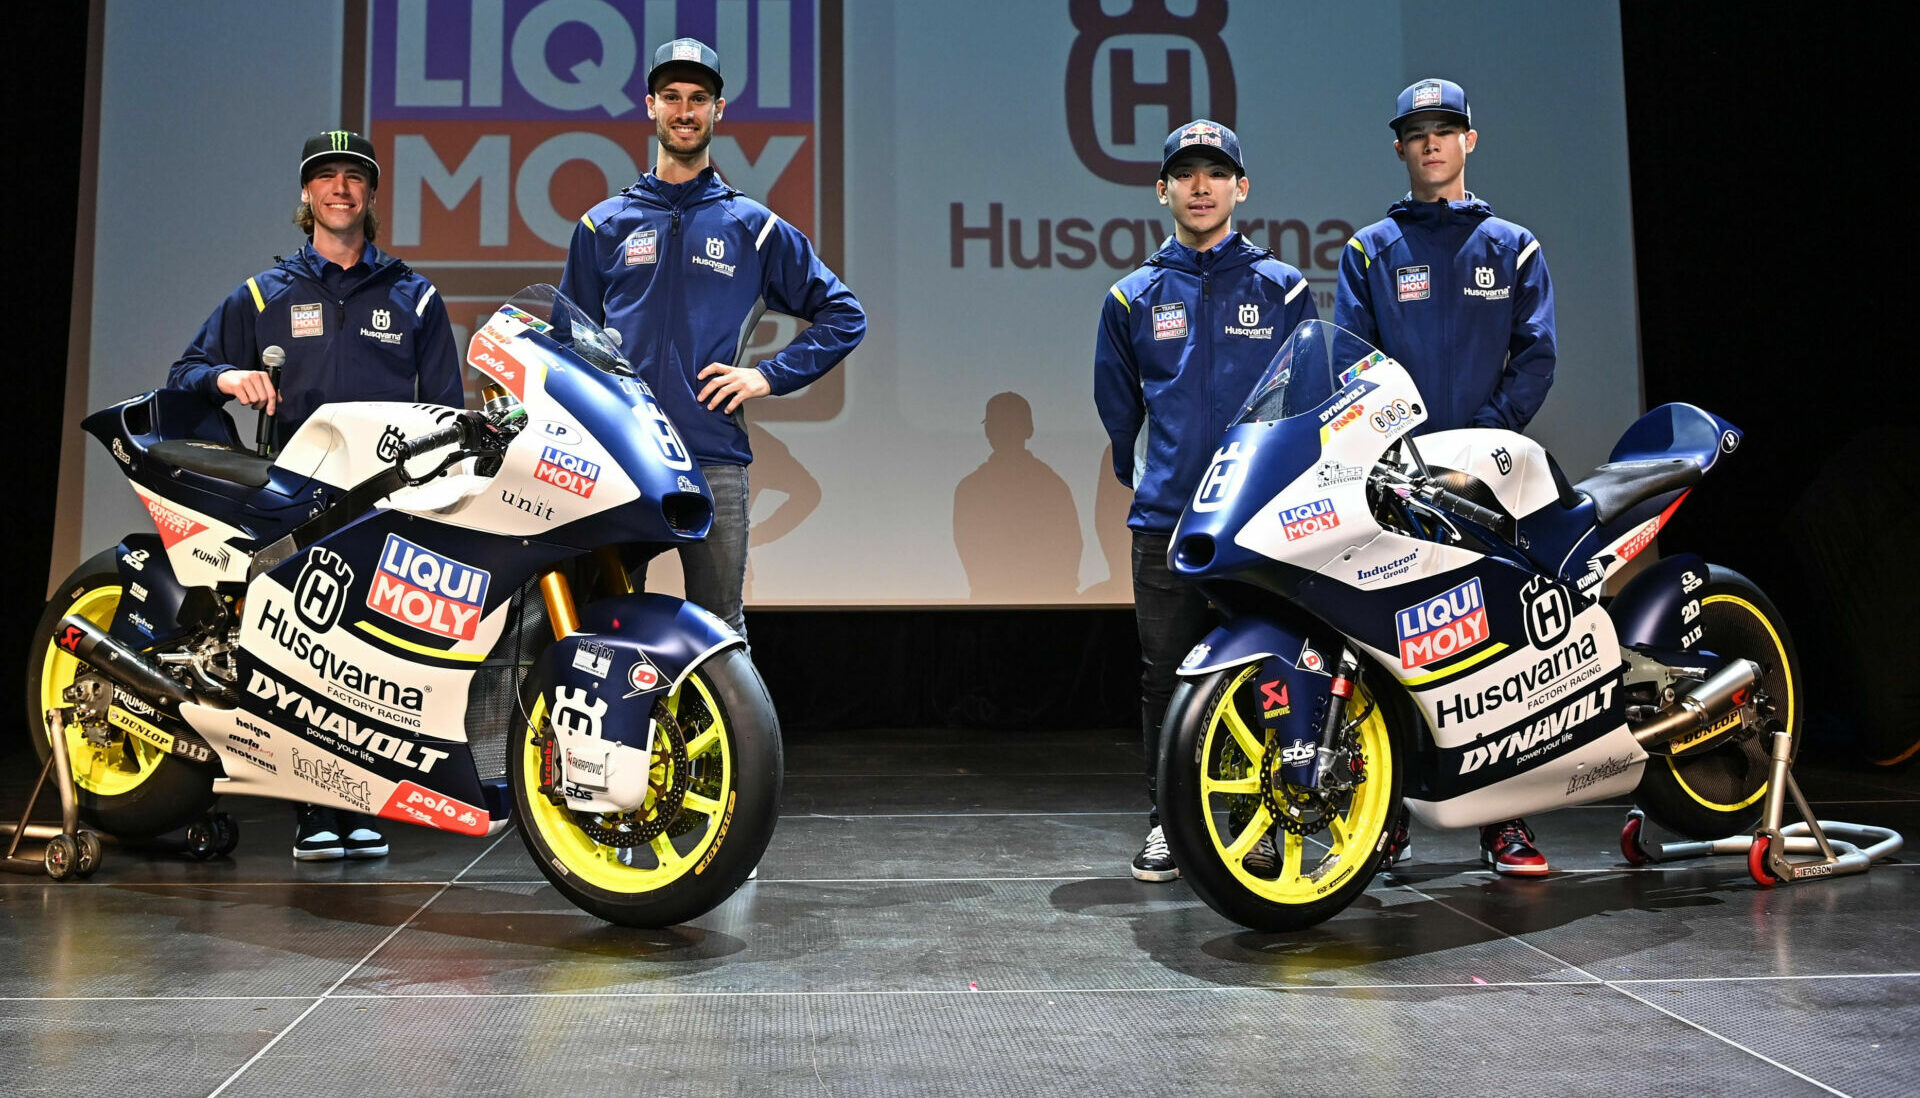 (From left) Husqvarna Moto2 riders Darryn Binder and Lukas Tulovic and Moto3 riders Ayumu Sasaki and Collin Veijer at the official team introduction in Germany. Photo courtesy Husqvarna Motorcycles.